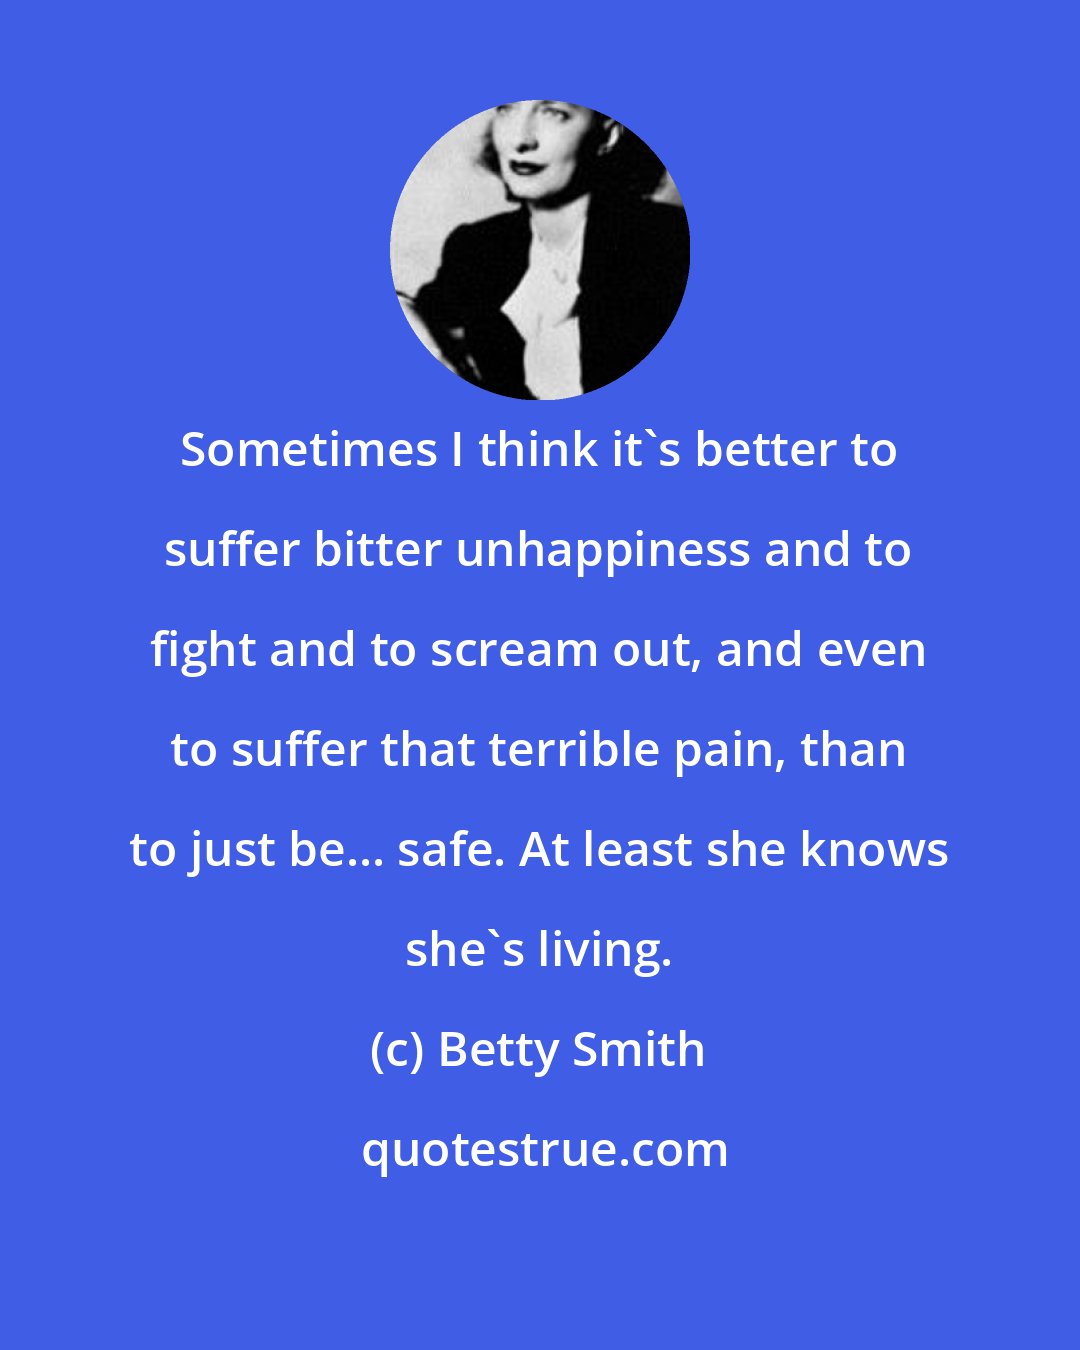 Betty Smith: Sometimes I think it's better to suffer bitter unhappiness and to fight and to scream out, and even to suffer that terrible pain, than to just be... safe. At least she knows she's living.